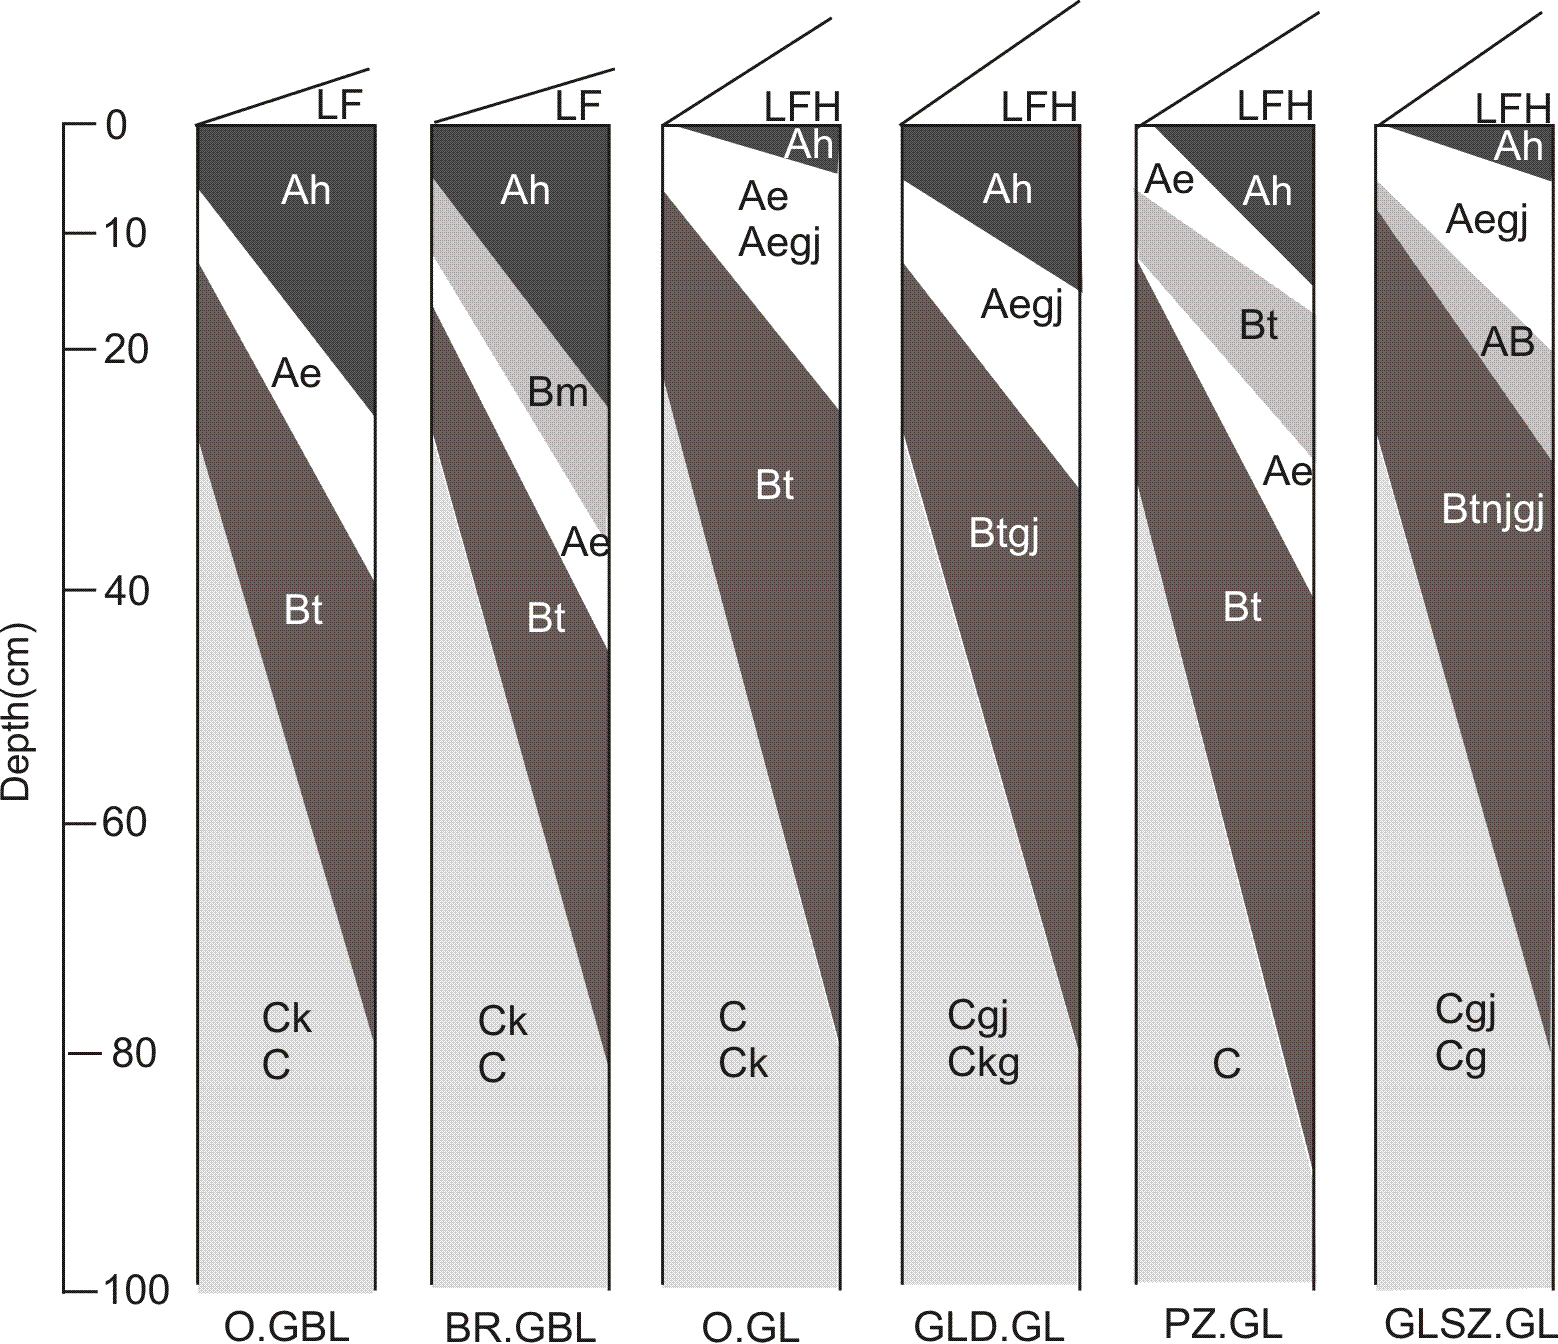 Figure 33 depicts a diagrammatic horizon pattern of the 2 subgroups of the Luvisolic order  (Gray Brown  Luvisol and Gray Luvisol). The two great groups of Luvisolic soils are distinguished mainly on the basis of soil temperature and the character of the surface horizons. Gray Brown Luvisols have a dark Ah horizon in which organic matter (OM) has been mixed (by faunal activity) with the mineral material resulting in a brown, often platy eluvial horizon (Ae) and an illuvial horizon (Bt) in which blocky structure is common. Their mean annual soil temperature is 8oC. Gray Luvisols have eluvial and illuvial horizons and may have an Ah horizon if the mean annual soil temperature is <8oC. The difference in the morphology and properties of Gray Brown Luvisols and Gray Luvisols has been theorized to be a difference in the role of fauna, especially earthworms.

Orthic Gray Brown Luvisol (O.GBL)
Common horizon sequence: Ah, Ae, Bt, Ck. These soils have the properties specified for the Luvisolic order and the Gray Brown Luvisol great group. They have well-developed Ah, eluvial, and Bt horizons, and usually calcareous C horizons. Faint mottling may occur immediately above or within the Bt horizon. Orthic Gray Brown Luvisols are identified by the following properties:
1.	These soils have either a forest-mull Ah horizon more than 5 cm thick or a dark-colored (moist) Ap horizon.
2.	These soils have an Ae horizon of which the upper 5 cm is light colored with a chroma of 3 or less. The difference in chroma between the upper and lower part of the Ae is less than 1.
3.	These soils have a Bt horizon and lack a Bf horizon.
4.	Distinct mottling indicative of gleying does not occur within 50 cm of the mineral surface, and prominent mottling does not occur at depths of 50-100 cm.

Brunisolic Gray Brown Luvisol (BR.GBL)
Common horizon sequence: Ah, Ae, Bm or Bf, Ae, Bt, BC, Ck. These soils have the properties specified for the Luvisolic order and the Gray Brown Luvisol great group. They differ from Orthic Gray Brown Luvisols by having in the upper solum either a Bm horizon at least 5 cm thick with a chroma of 3 or more, or a Bf horizon less than 10 cm thick that does not extend below 15 cm. Such Bm or Bf horizons are thought to have developed in a former Ae horizon. If disturbance results in the Bm or Bf horizon being incorporated into the Ap, the disturbed soil is classified as an Orthic Gray Brown Luvisol.

Orthic Gray Luvisol (O.GL)
Common horizon sequence: LFH, Ae, AB, Bt, C or Ck. These soils have the properties specified for the Luvisolic order and the Gray Luvisol great group. They have well-developed Ae and Bt horizons and usually have organic surface horizons. Faint mottling may occur immediately above or within the Bt horizon. Orthic Gray Luvisols are identified by the following properties:
1.	They have an Ae horizon with a chroma of less than 3 unless the chroma of the parent material is 4 or more.
2.	They have a Bt horizon.
3.	They lack a Bf horizon.
4.	They lack a fragipan.
5.	They may have a dark-colored, mineral-organic surface horizon (Ah or Ahe) less than 5 cm thick.
6.	They may have an Ap horizon, but its dry color value must be 5 or higher.
7.	Distinct mottling, that indicates gleying does not occur within 50 cm of the mineral surface. Prominent mottling does not occur at depths of 50-100 cm.

Gleyed Dark Gray Luvisol (GLD.GL)
Common horizon sequence: LFH, Ah or Ahe, Ae, Btgj, Cg or Ckg. These soils have the properties specified for the Luvisolic order and the Gray Luvisol great group. They differ from Dark Gray Luvisols by having either distinct mottles that indicate gleying within 50 cm of the mineral surface, or prominent mottles at depths of 50-100 cm.

Podzolic Gray Luvisol (PZ.GL)
Common horizon sequence: LFH, Ae, Bf, Ae, Bt, BC, C or Ck. These soils have the properties specified for the Luvisolic order and the Gray Luvisol great group. They differ from Orthic Gray Luvisols by having a Bf horizon at least 10 cm thick in the upper solum. They may also have a dark-colored Ah or Ahe horizon 5 cm or more in thickness. The upper boundary of the Bt horizon must be within 50 cm of the mineral surface or the soil is classified in the Podzolic order.

Gleyed Solonetzic Gray Luvisol (GLSZ.GL)
Common horizon sequence: LFH, Ae, ABgj, Btnjgj, Cgj or Csag. These soils have the properties specified for the Luvisolic order and the Gray Luvisol great group. They differ from Solonetzic Gray Luvisols by having either distinct mottles that indicate gleying within 50 cm of the mineral surface, or prominent mottles at depths of 50-100 cm. They do not have an Ah or Ahe horizon 5 cm or more in thickness.
.